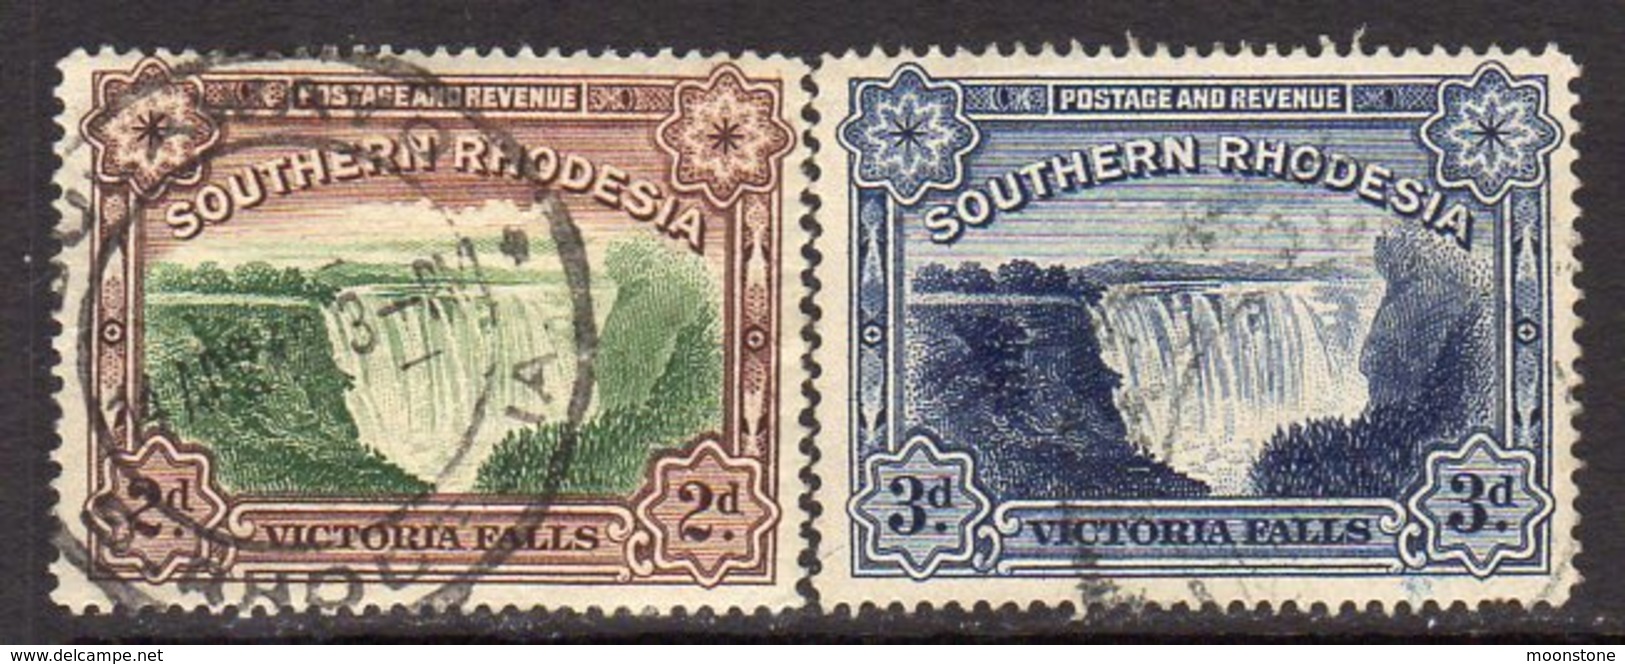 Southern Rhodesia 1935-41 Victoria Falls Set Of 2, 'Postage & Revenue', Perf. 14, Used (SG 35 - 35b) - Southern Rhodesia (...-1964)